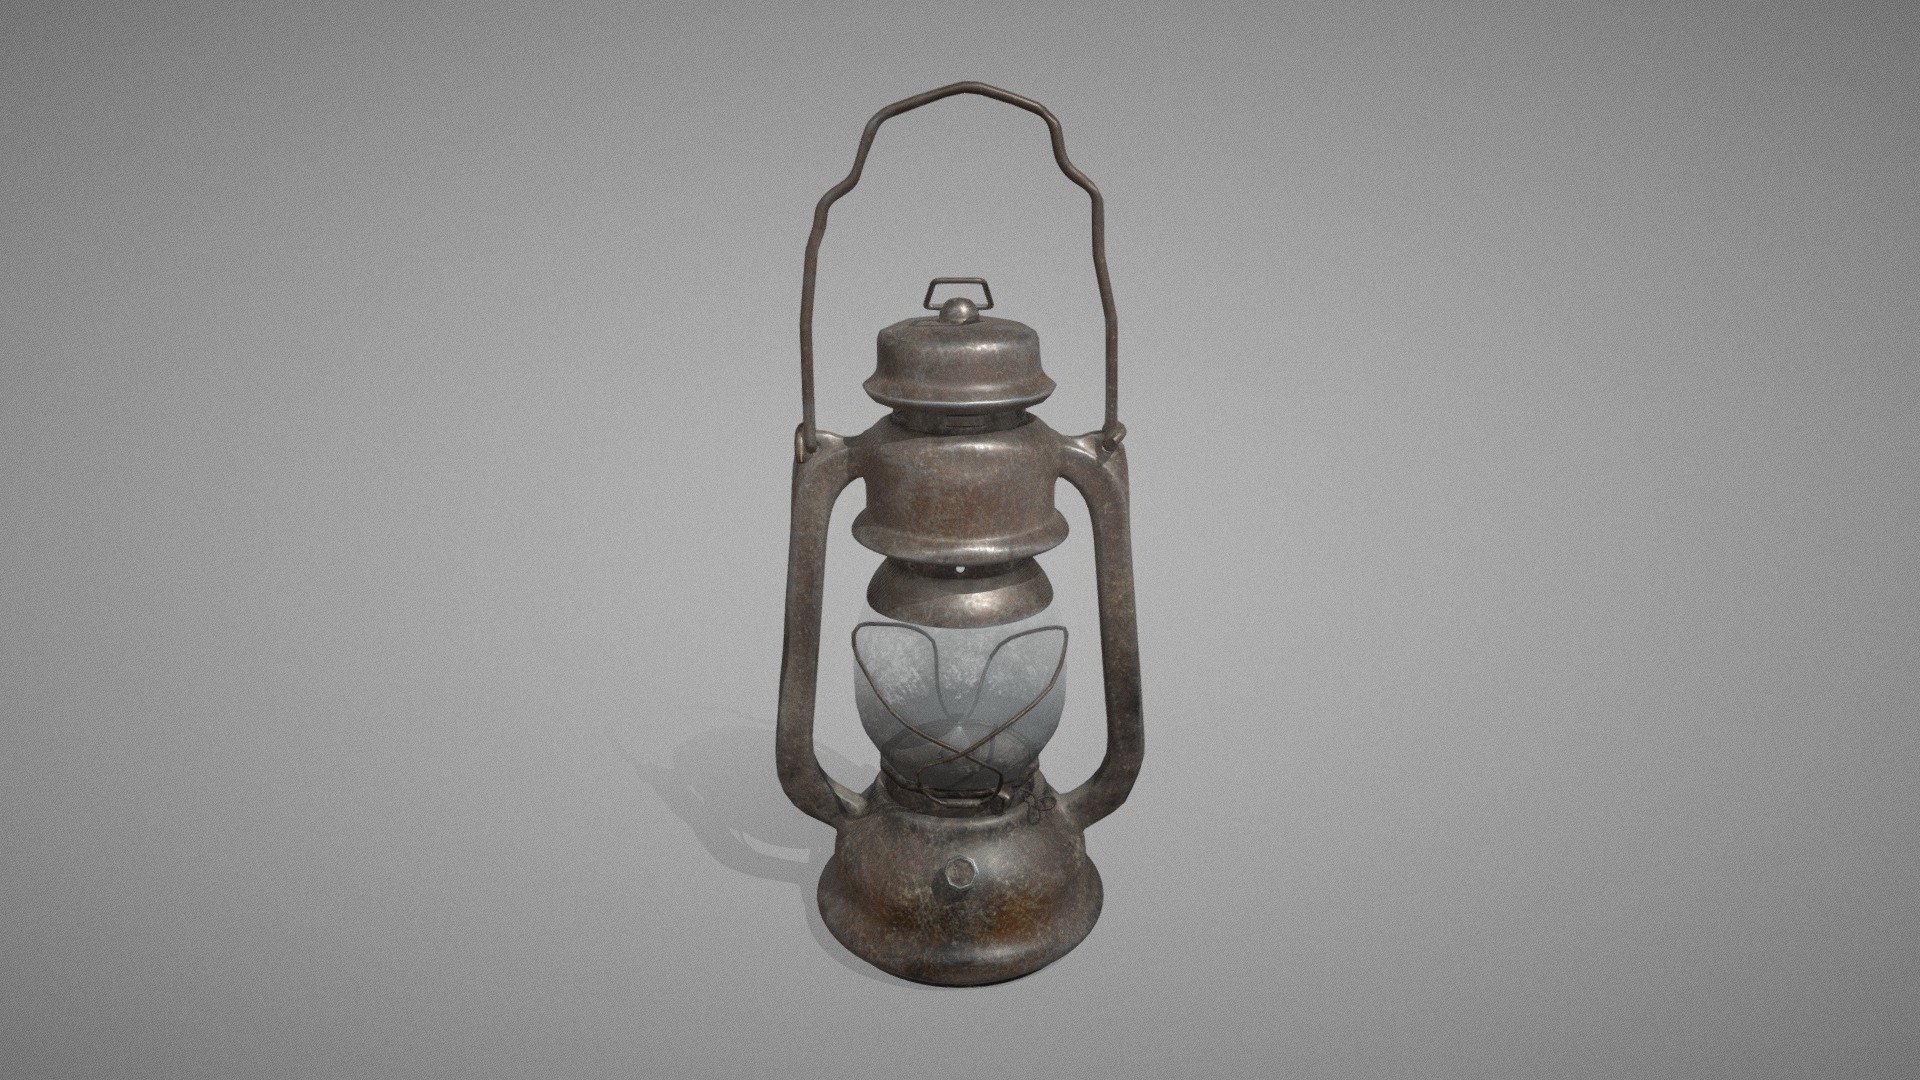 Realistic low-poly 3D model of an old rusty lantern.
Modelled in blender and textured in Substance painter.
This model has a clean topology and UV-mapped properly (UV seams with clean edge flow)
Textures used:
4k textures including AO, BaseColor, Normal, Height, Roughness, Metalness and Opacity 3d model